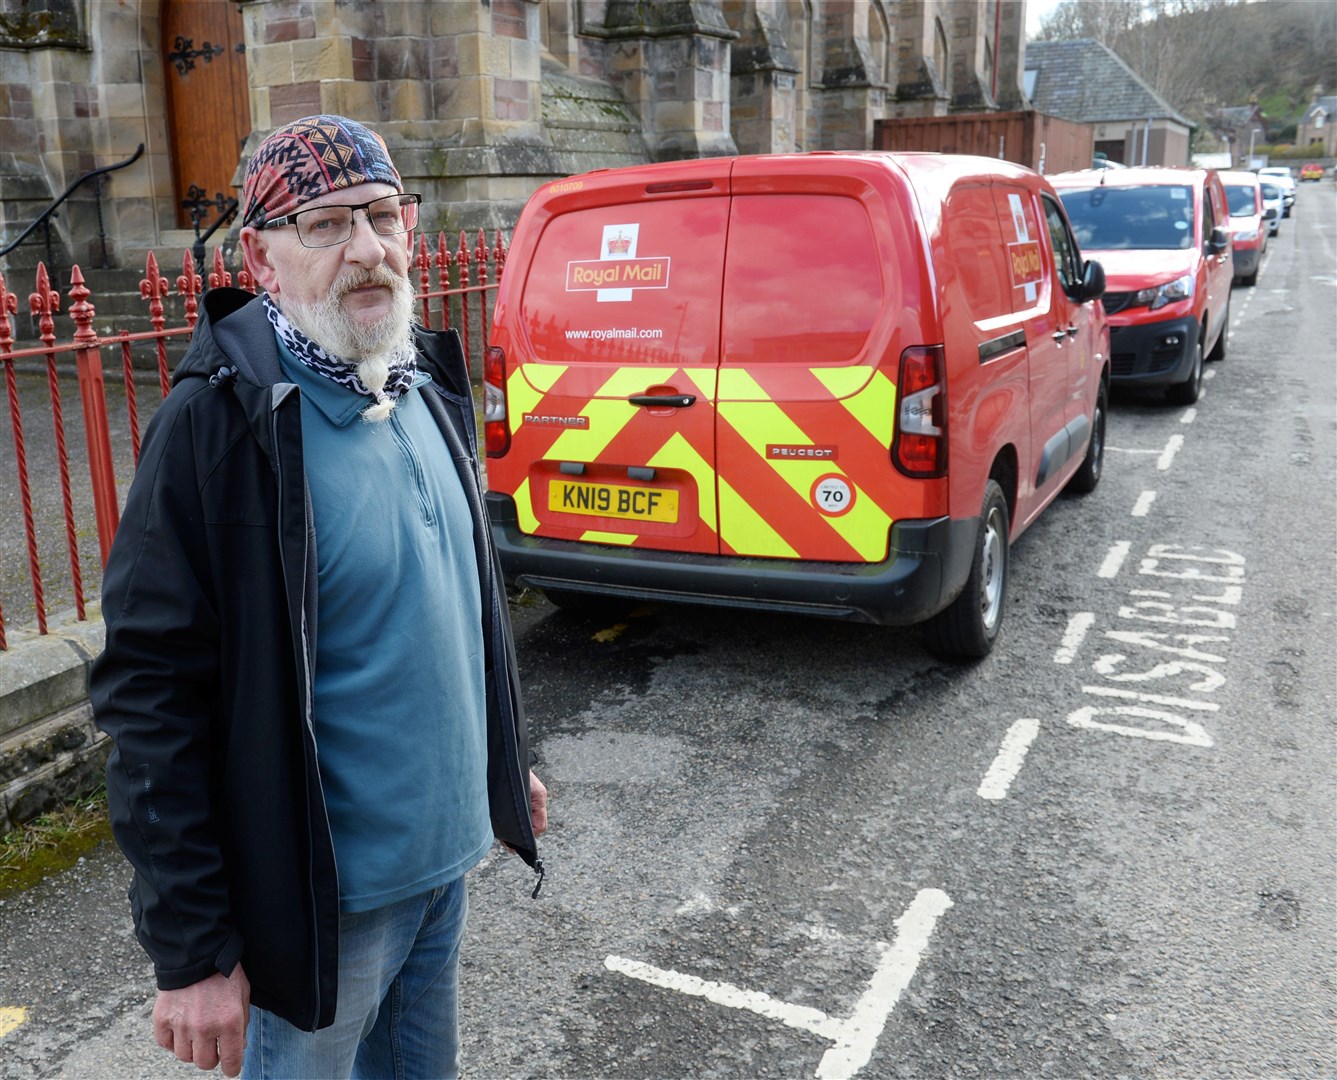 Leslie Mikolajczyk is unhappy with Royal Mail in Park Street Dingwall with vans parking in disabled spaces and on double yellow lines. Picture: Gary Anthony